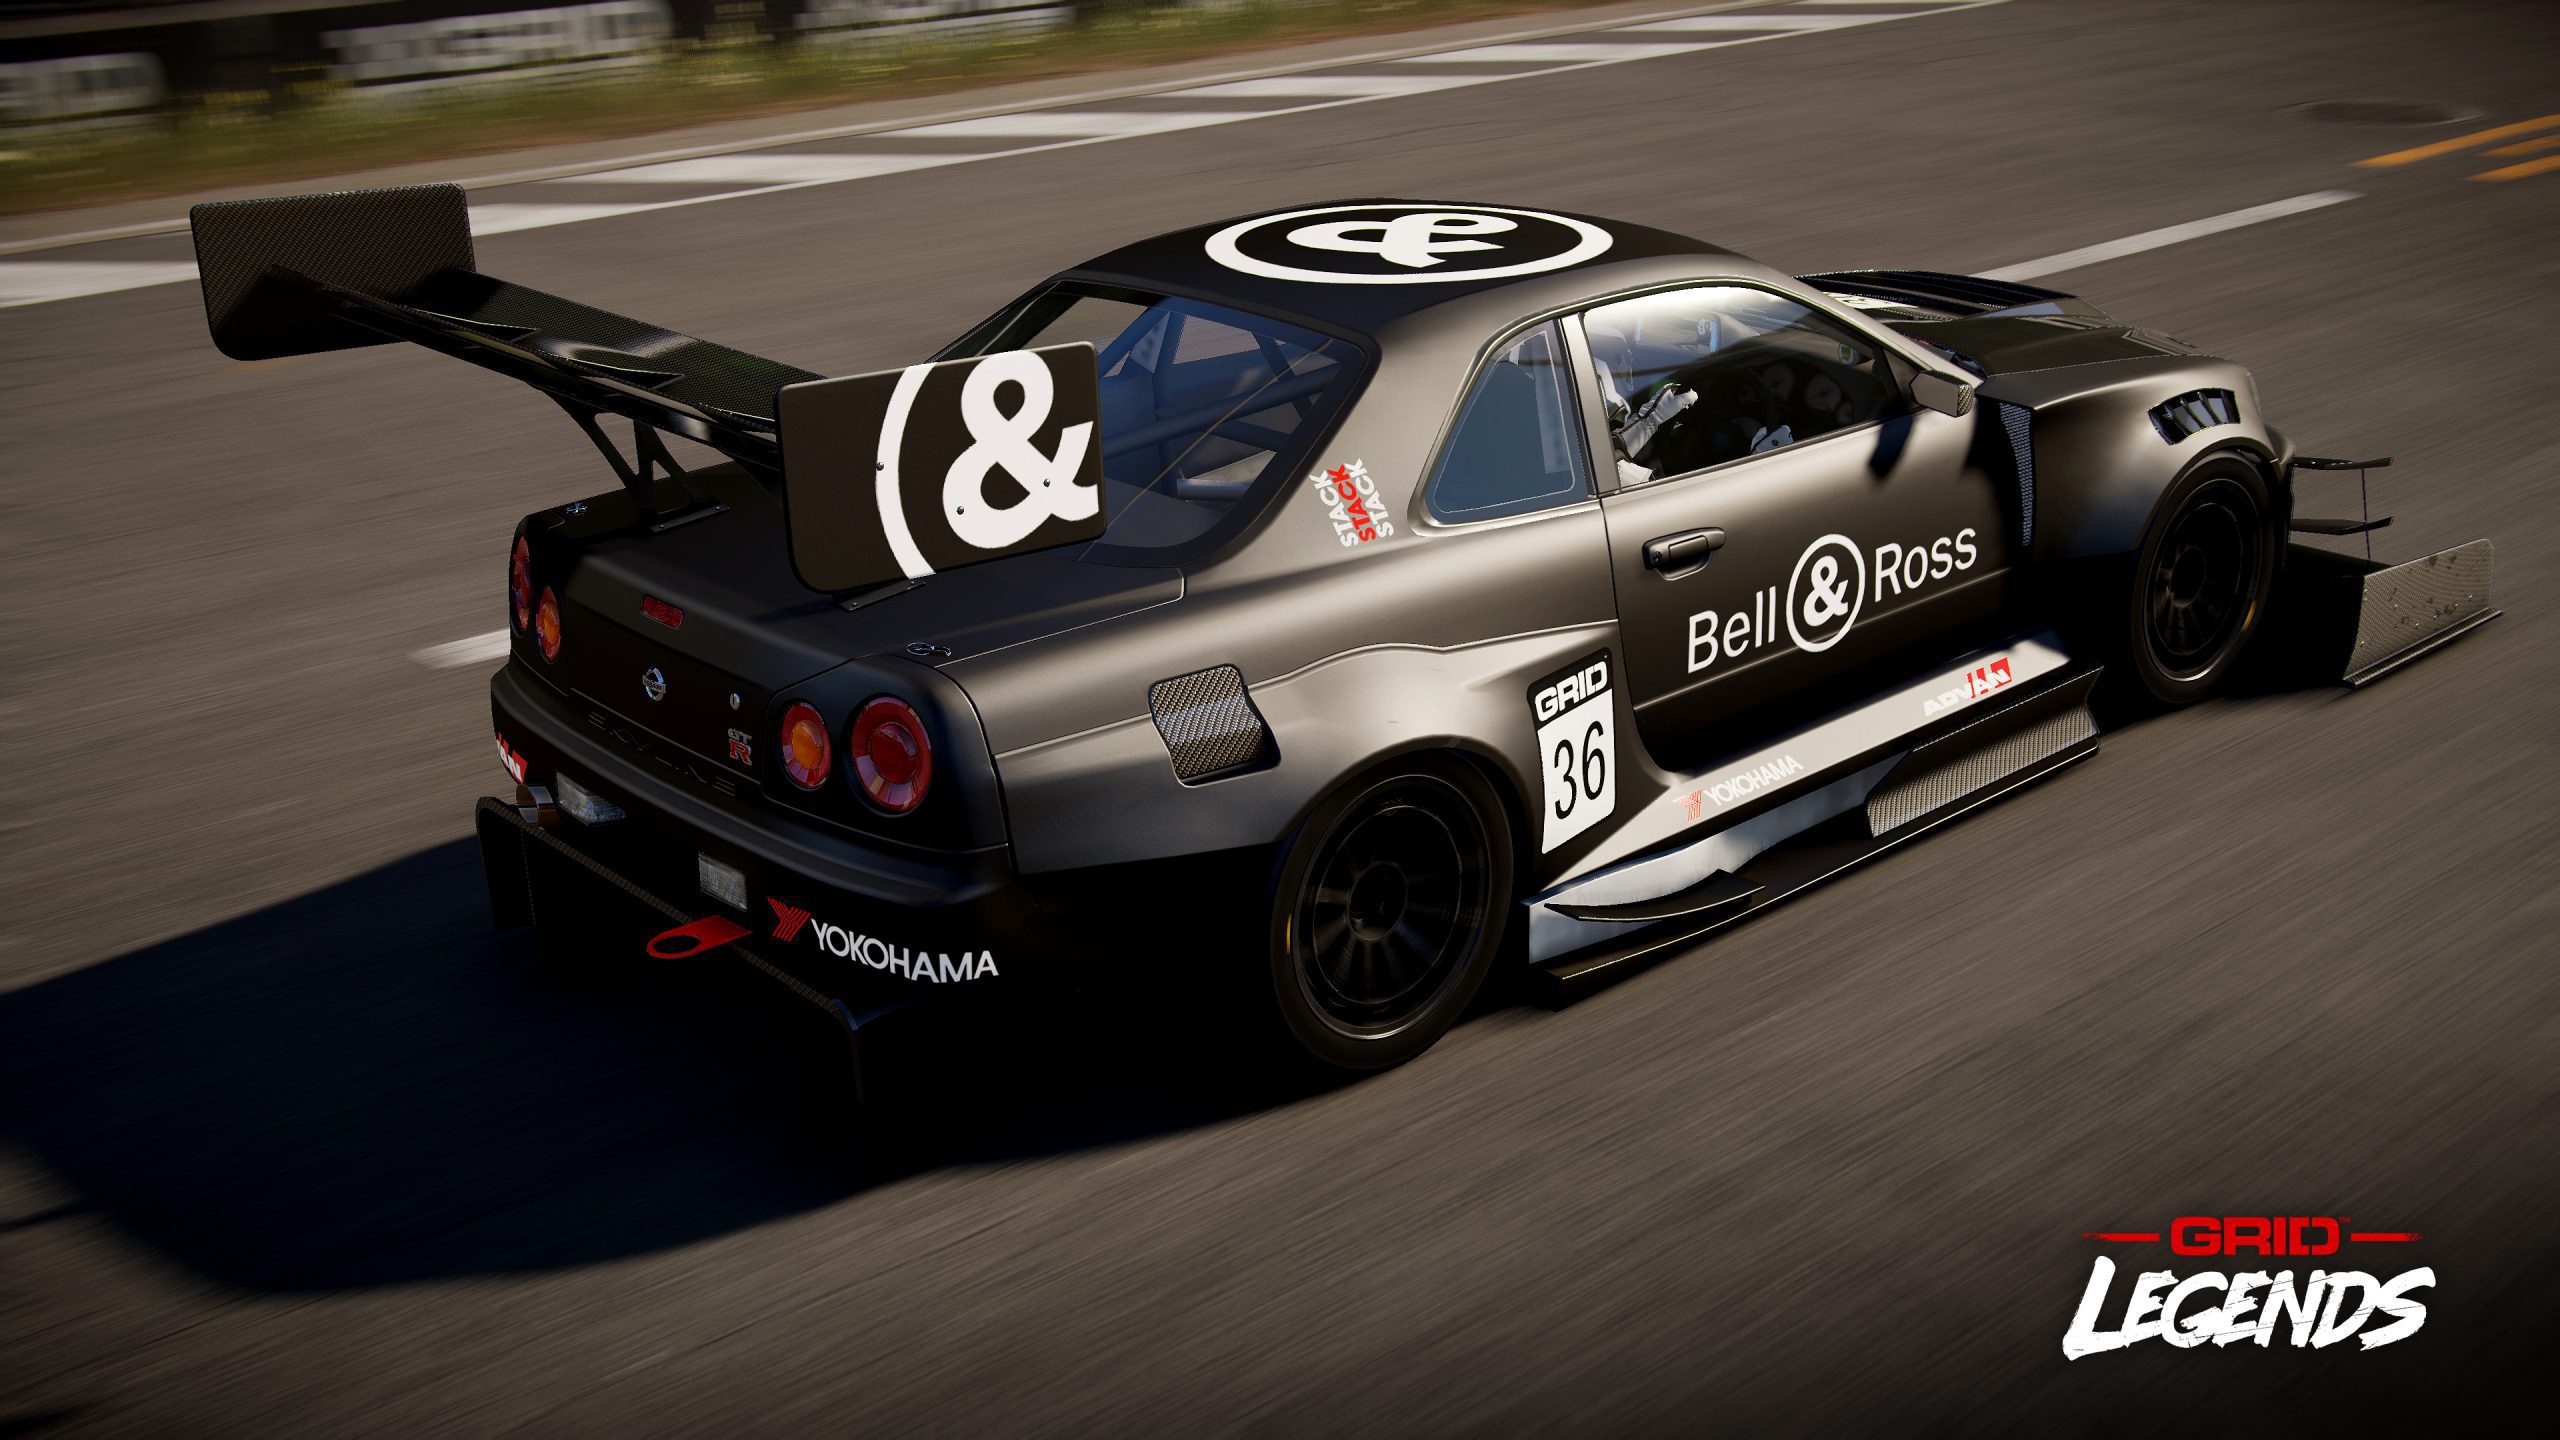 Bell and Ross In Game Livery in GRID Legends